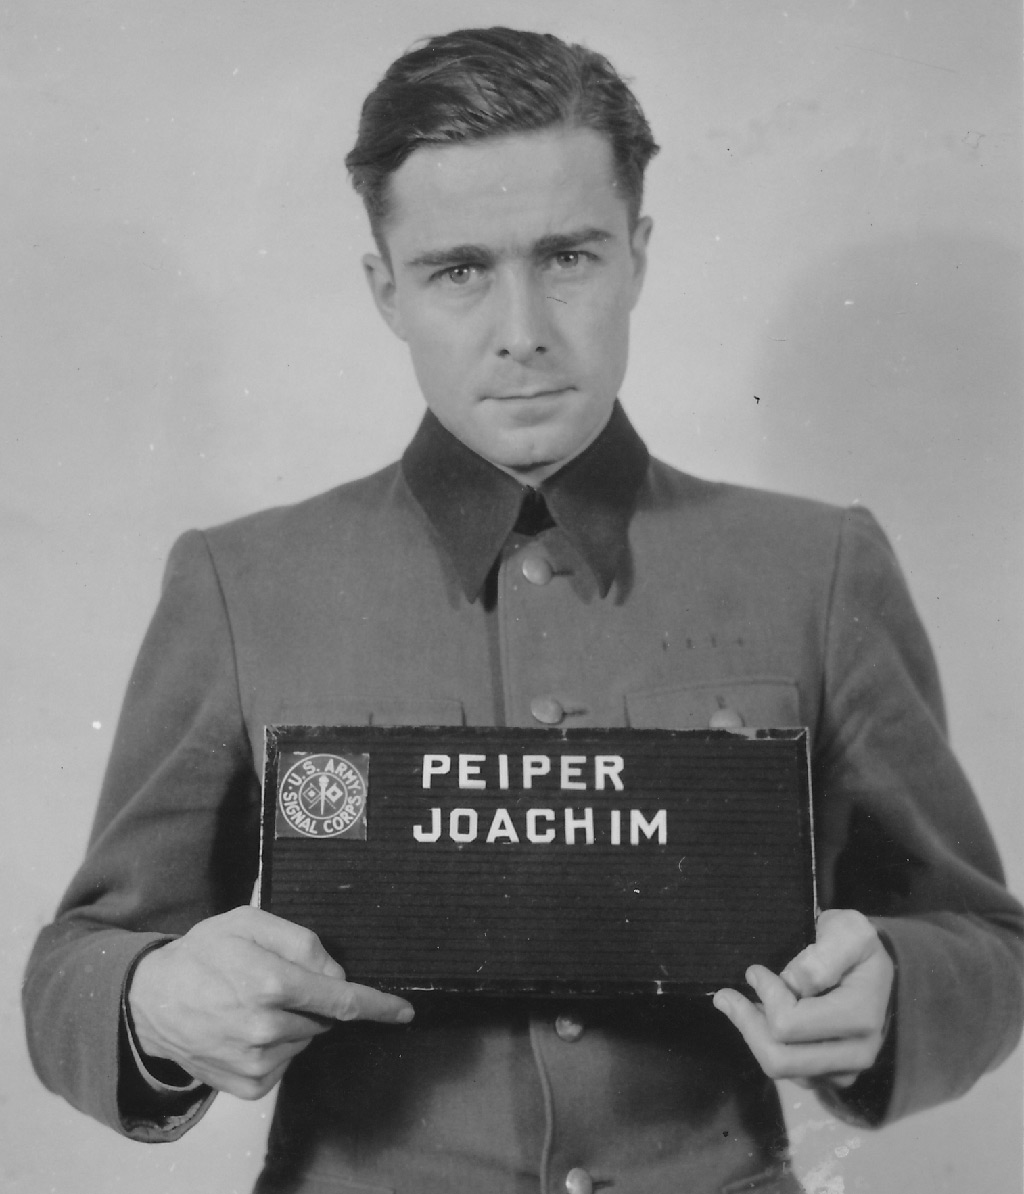 Lieutenant Colonel Joachim Peiper led a vanguard of six thousand SS troops across Belgium in a vain effort to seize crossings on the Meuse river. Convicted of mass murder, he would be condemned to death but his sentence was commuted.